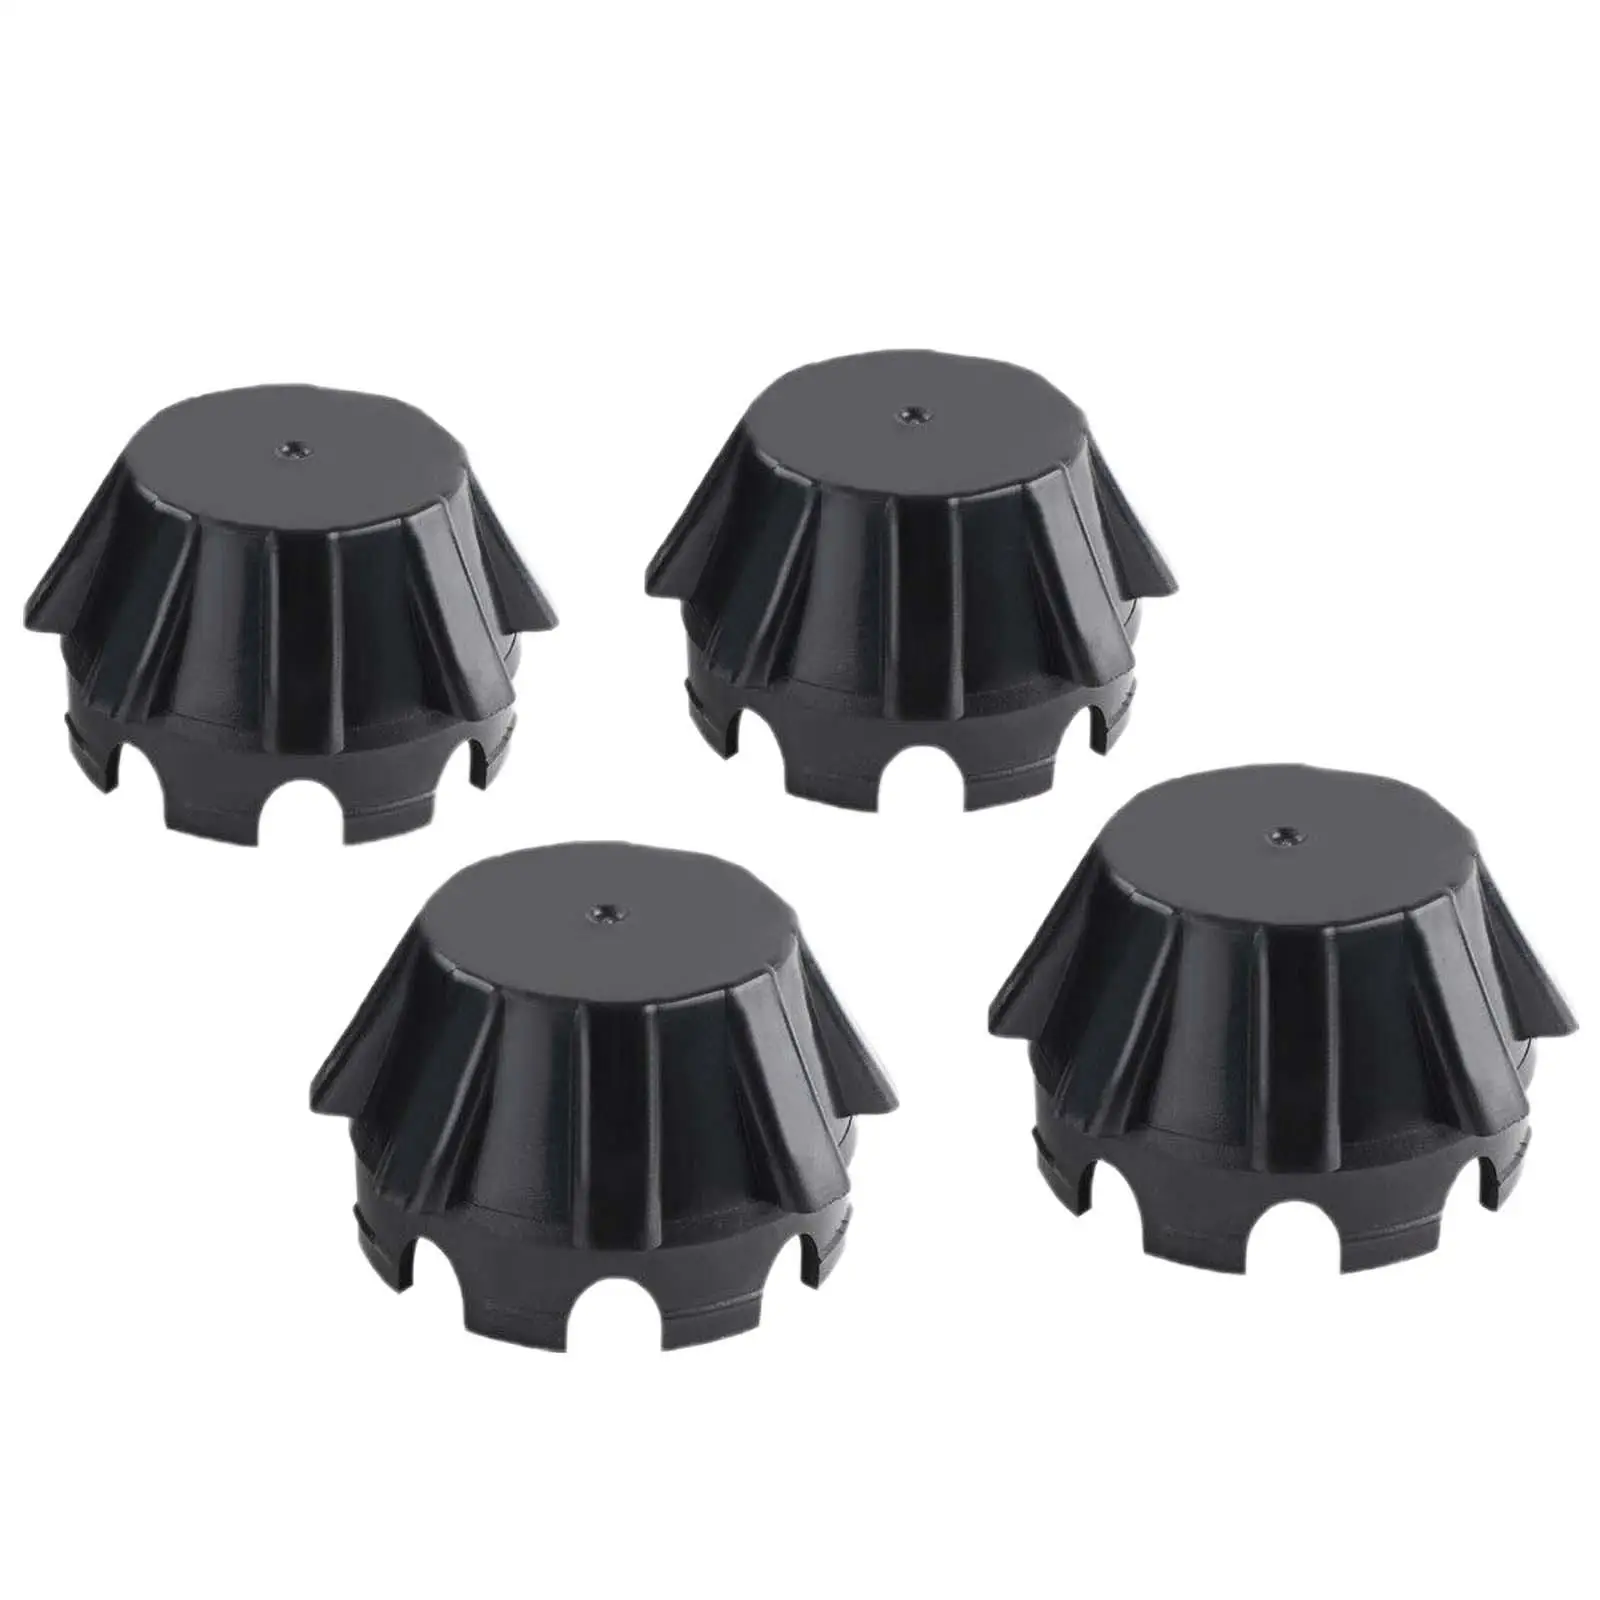 4Pcs Wheel Center Hub Caps Cover 11065-1341 for Kawasaki Krx 1000 Professional Easy to Install Stable Performance Durable